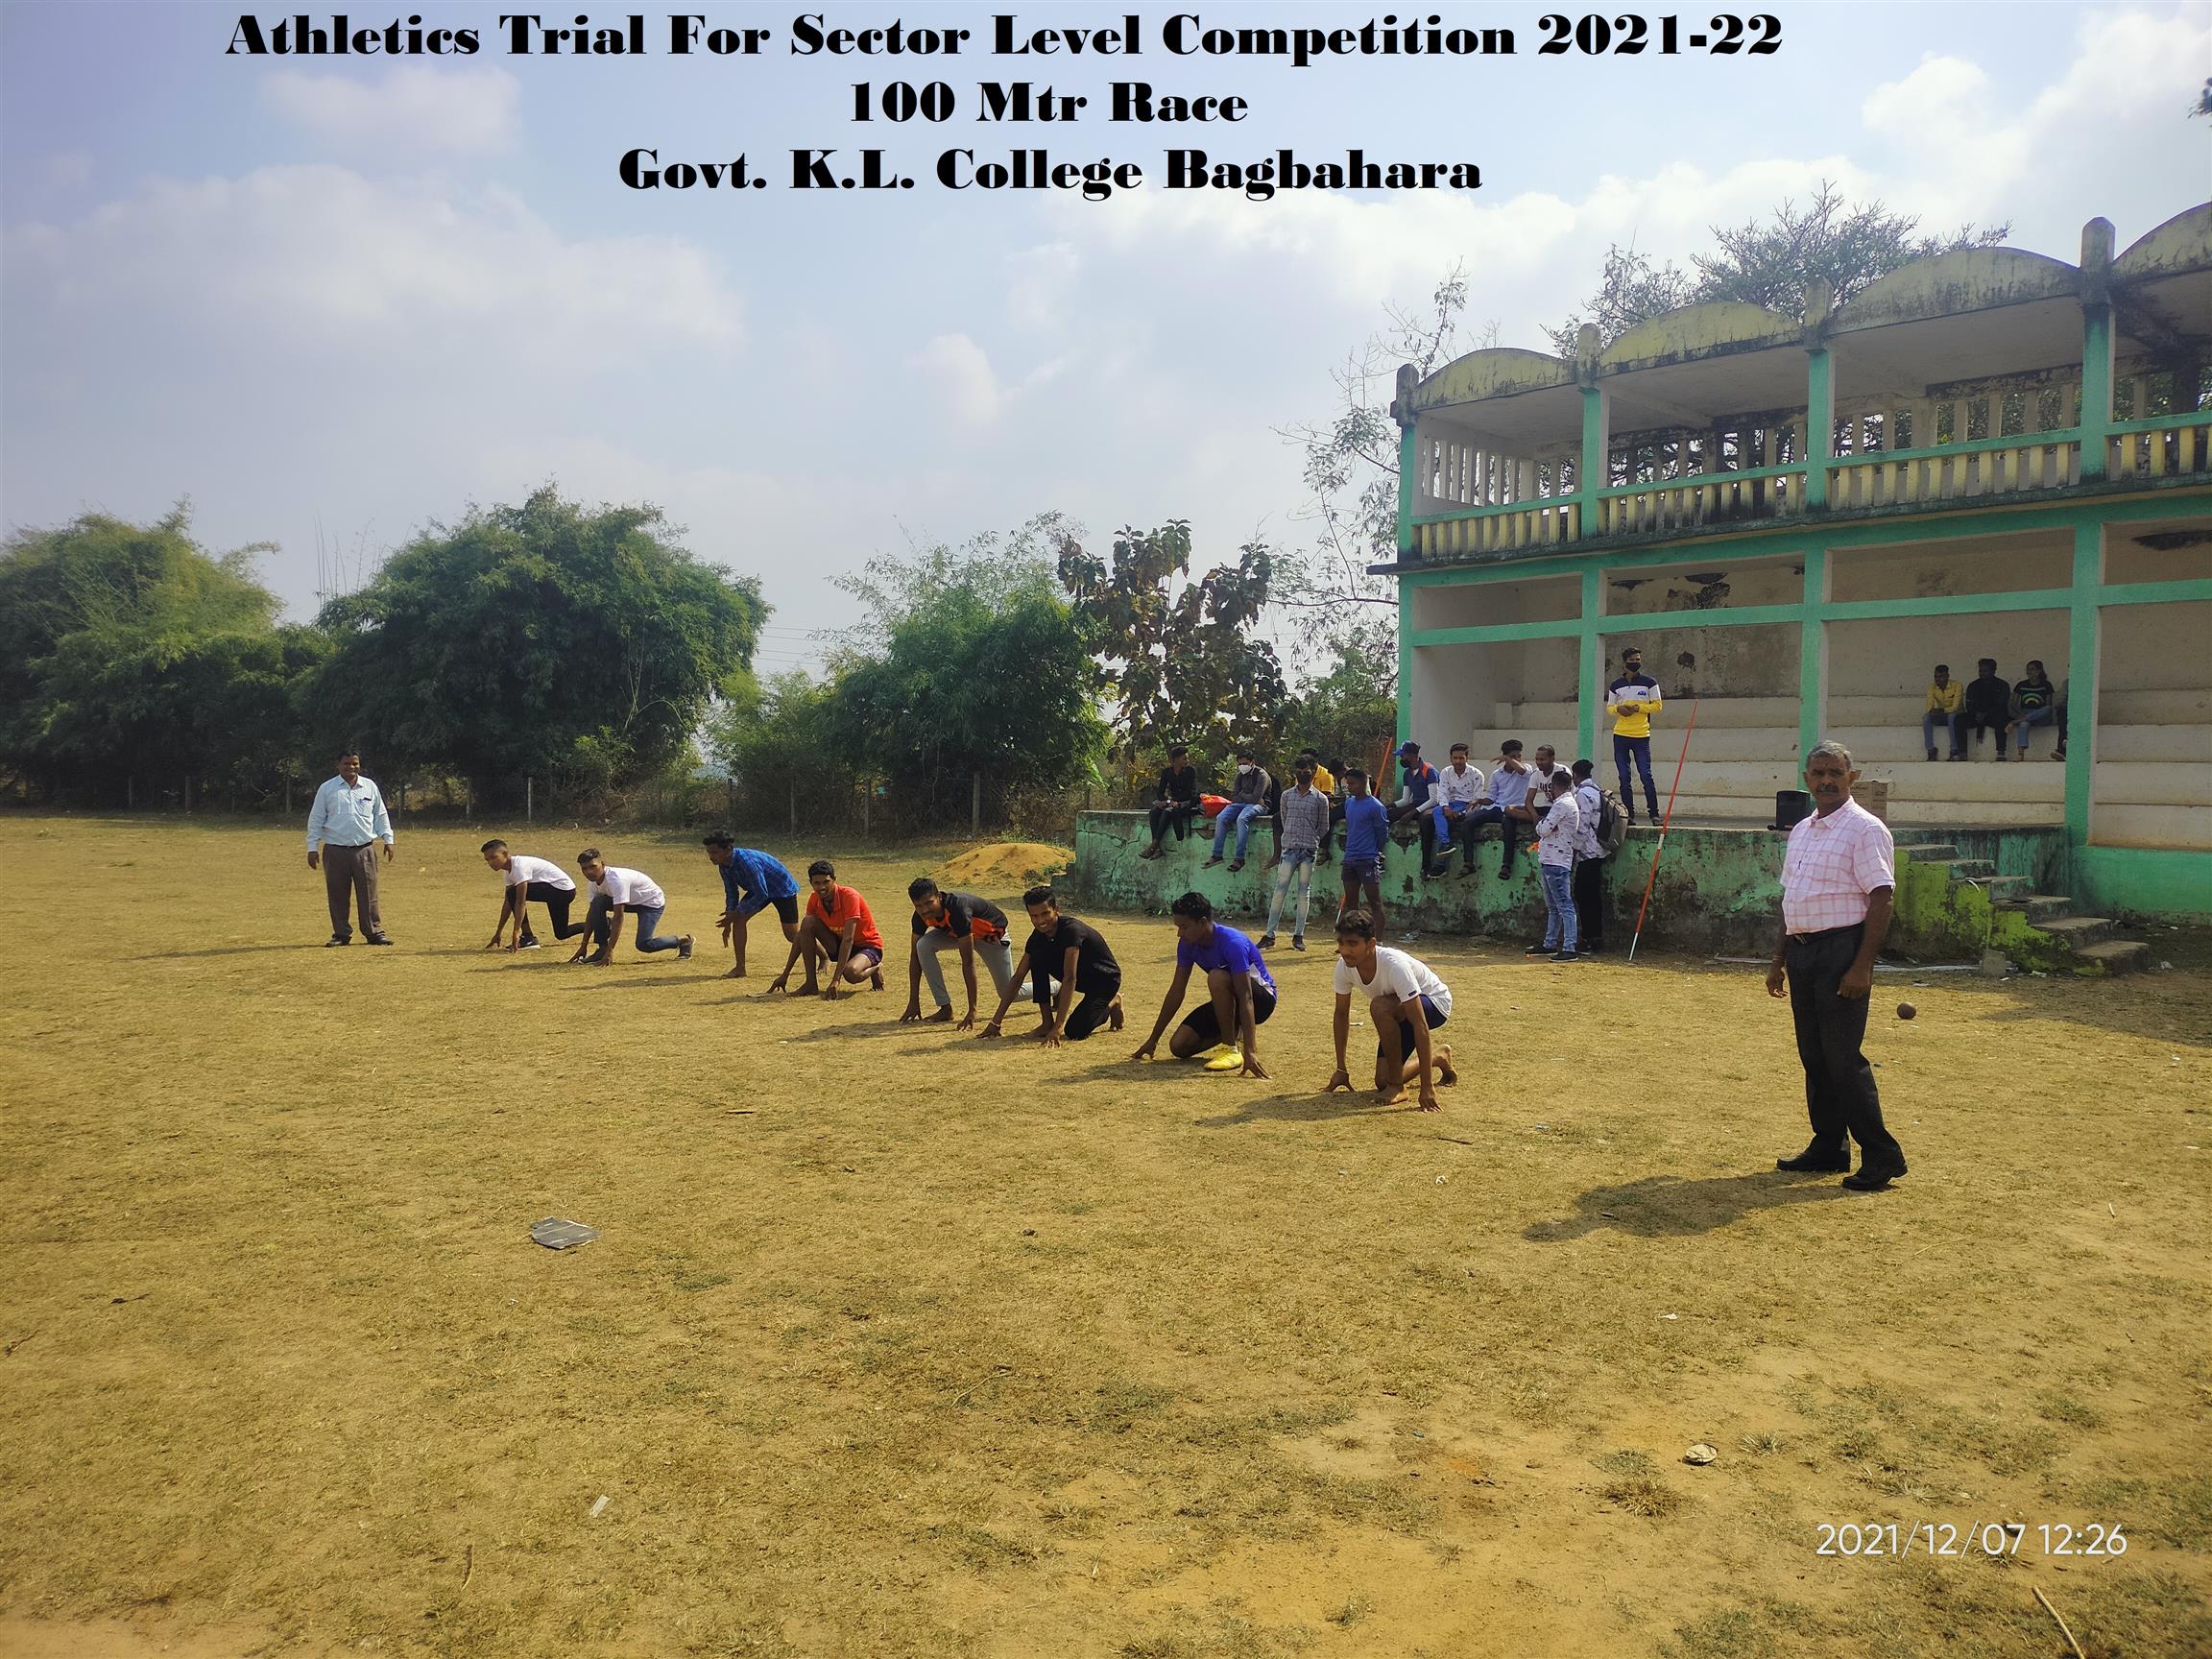 SPORTS COMPETITION 2021-22